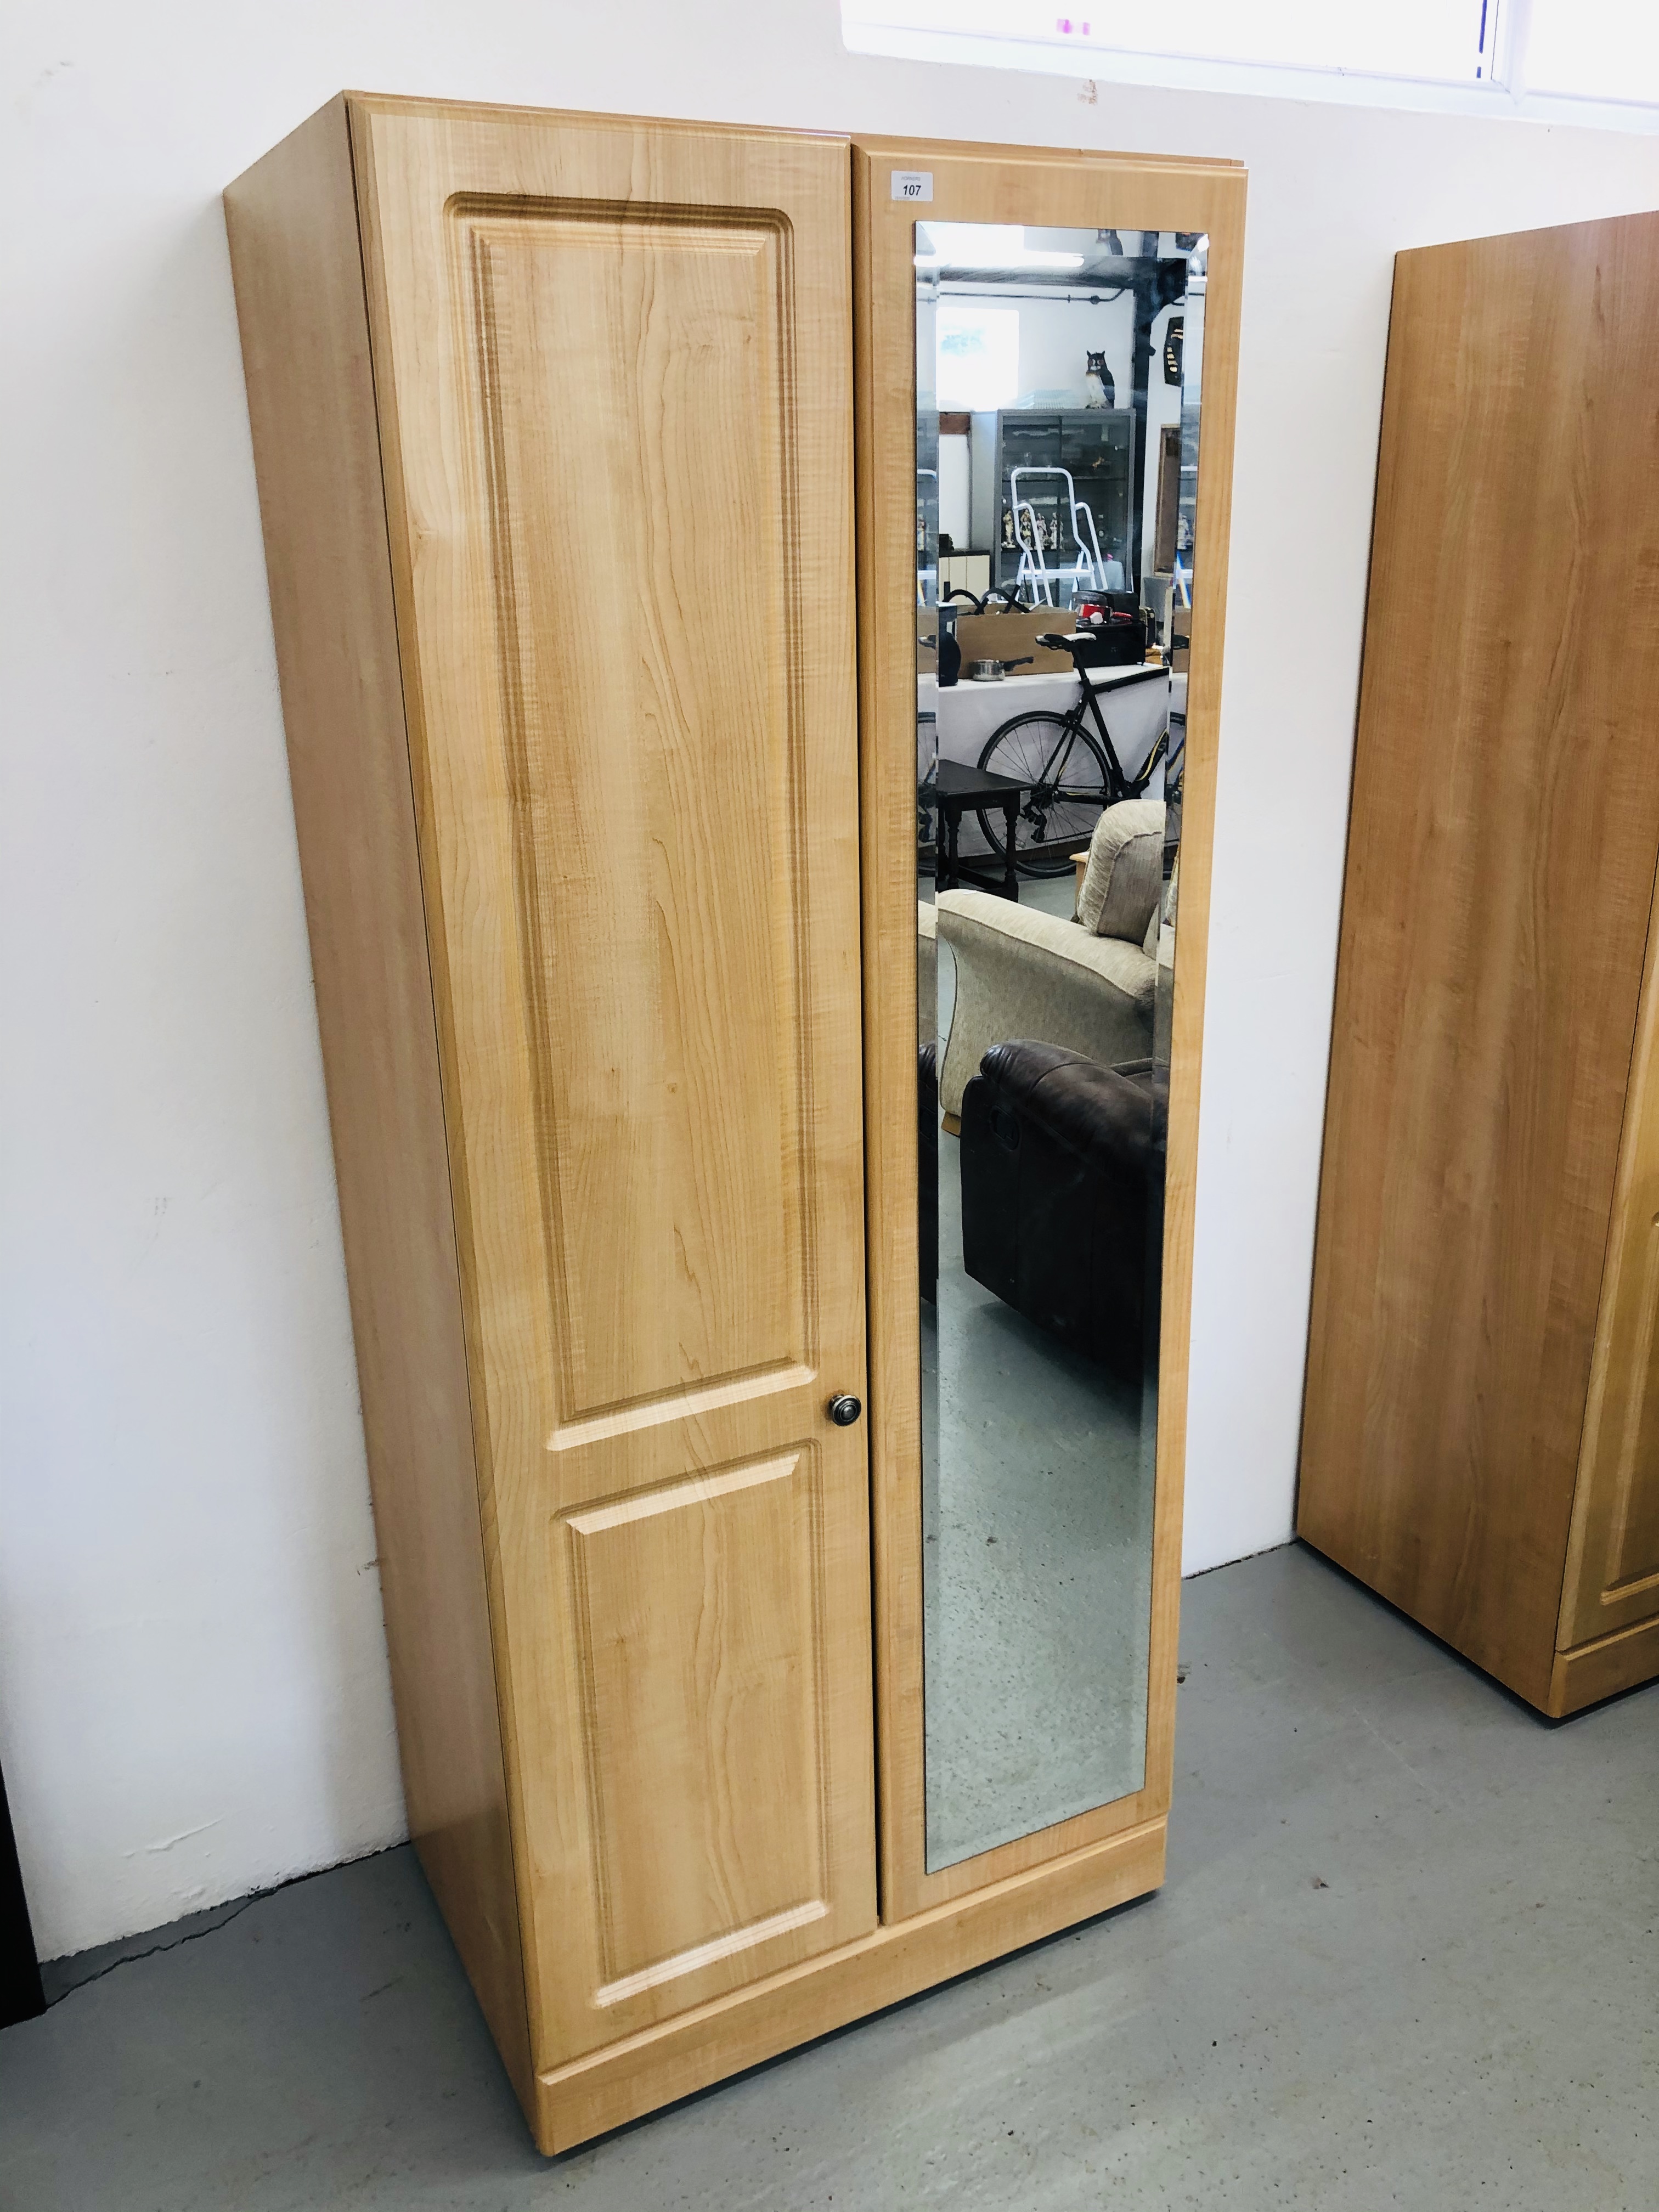 A MODERN TWO DOOR LIMED FINISH WARDROBE WITH MIRROR TO ONE DOOR WIDTH 80CM. HEIGHT 192CM. - Image 2 of 2